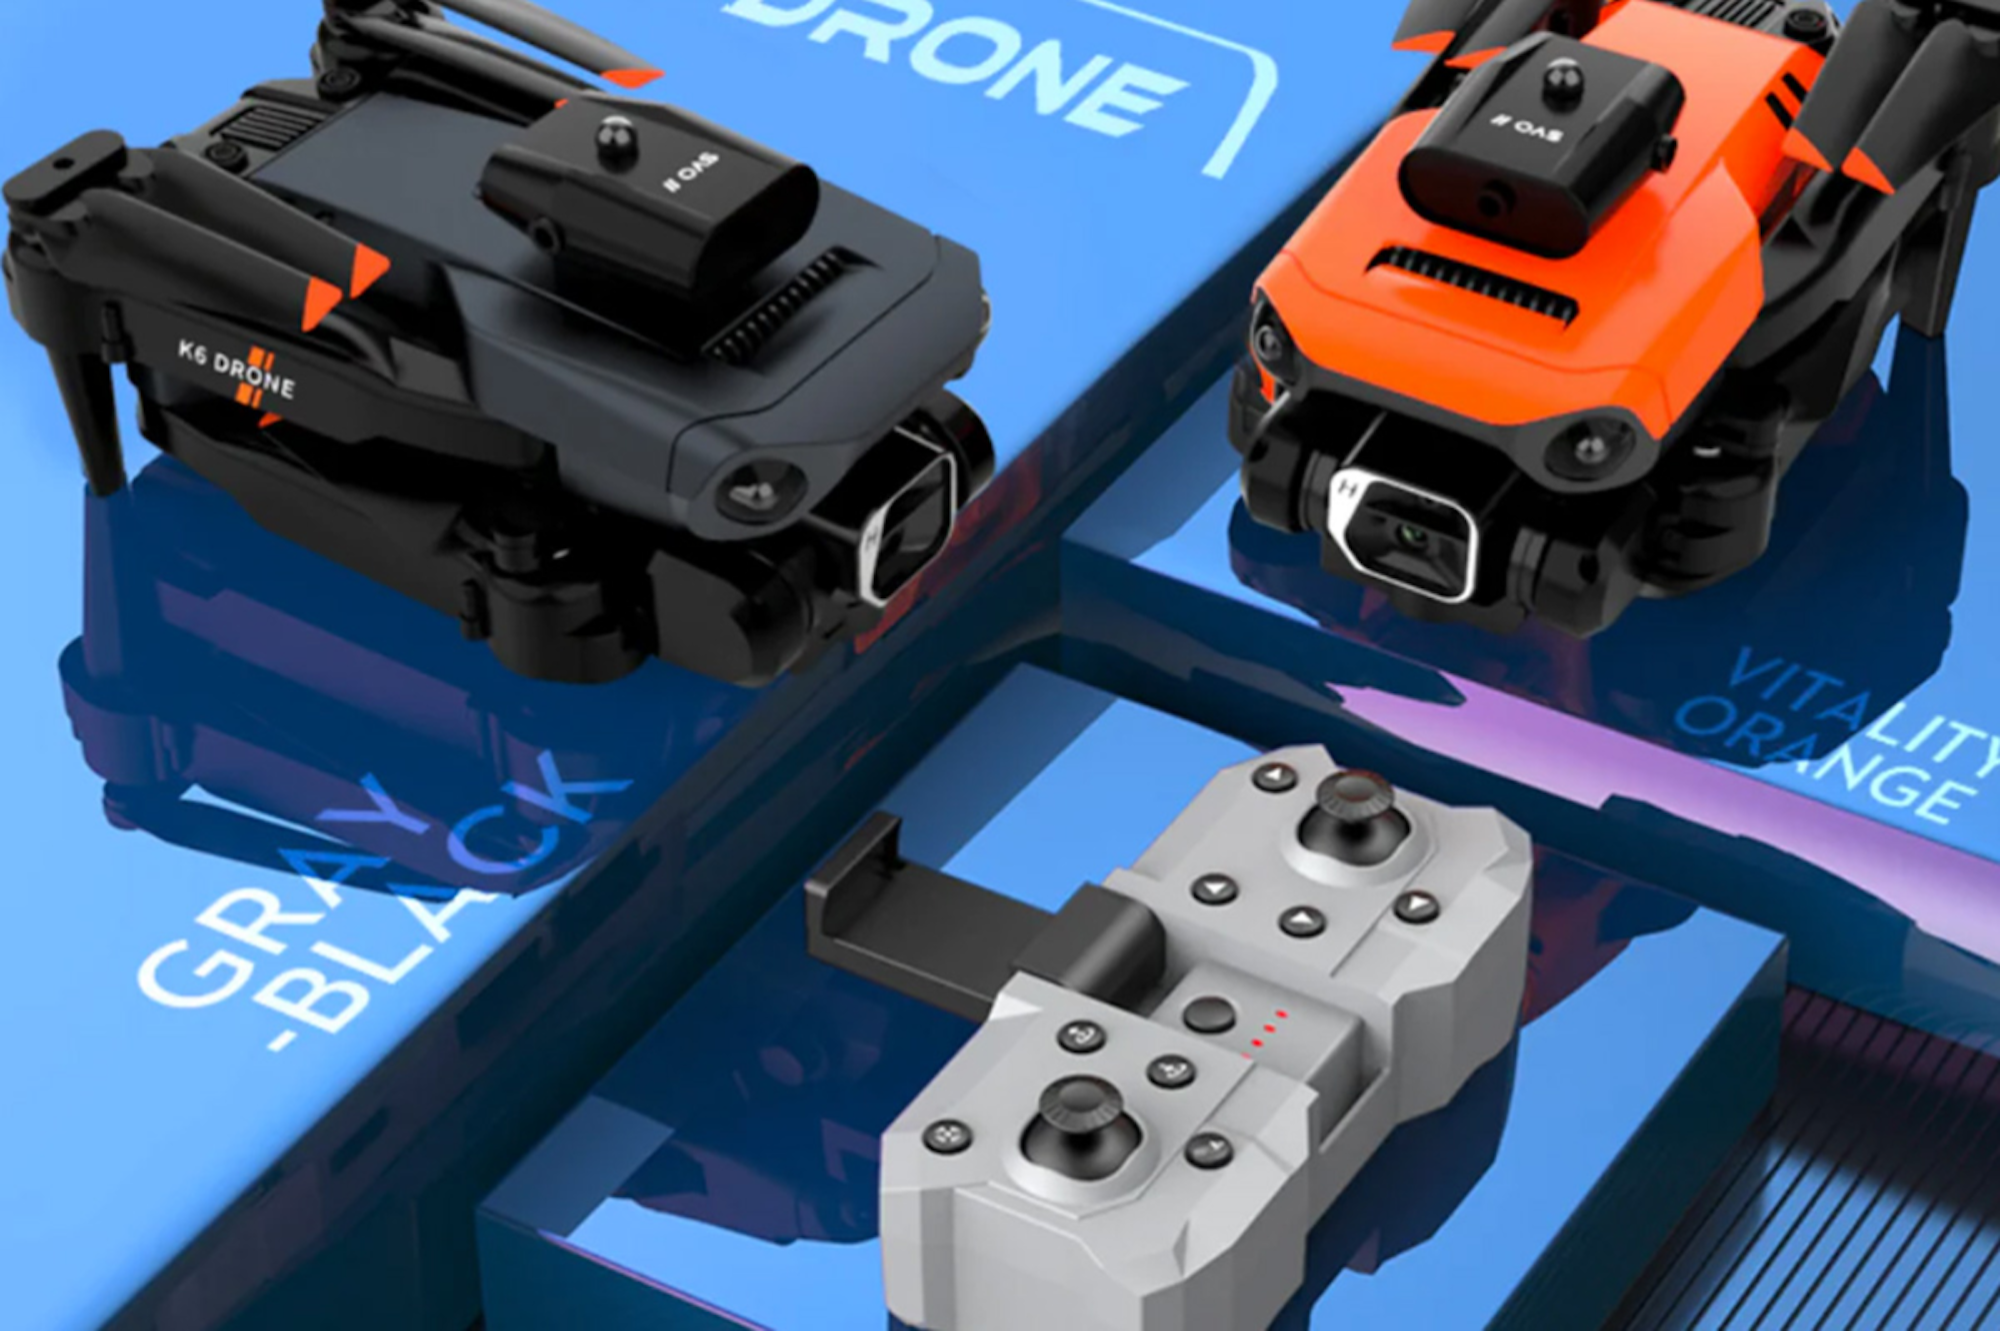 Get a New 4K Camera Drone for More Than Half Off